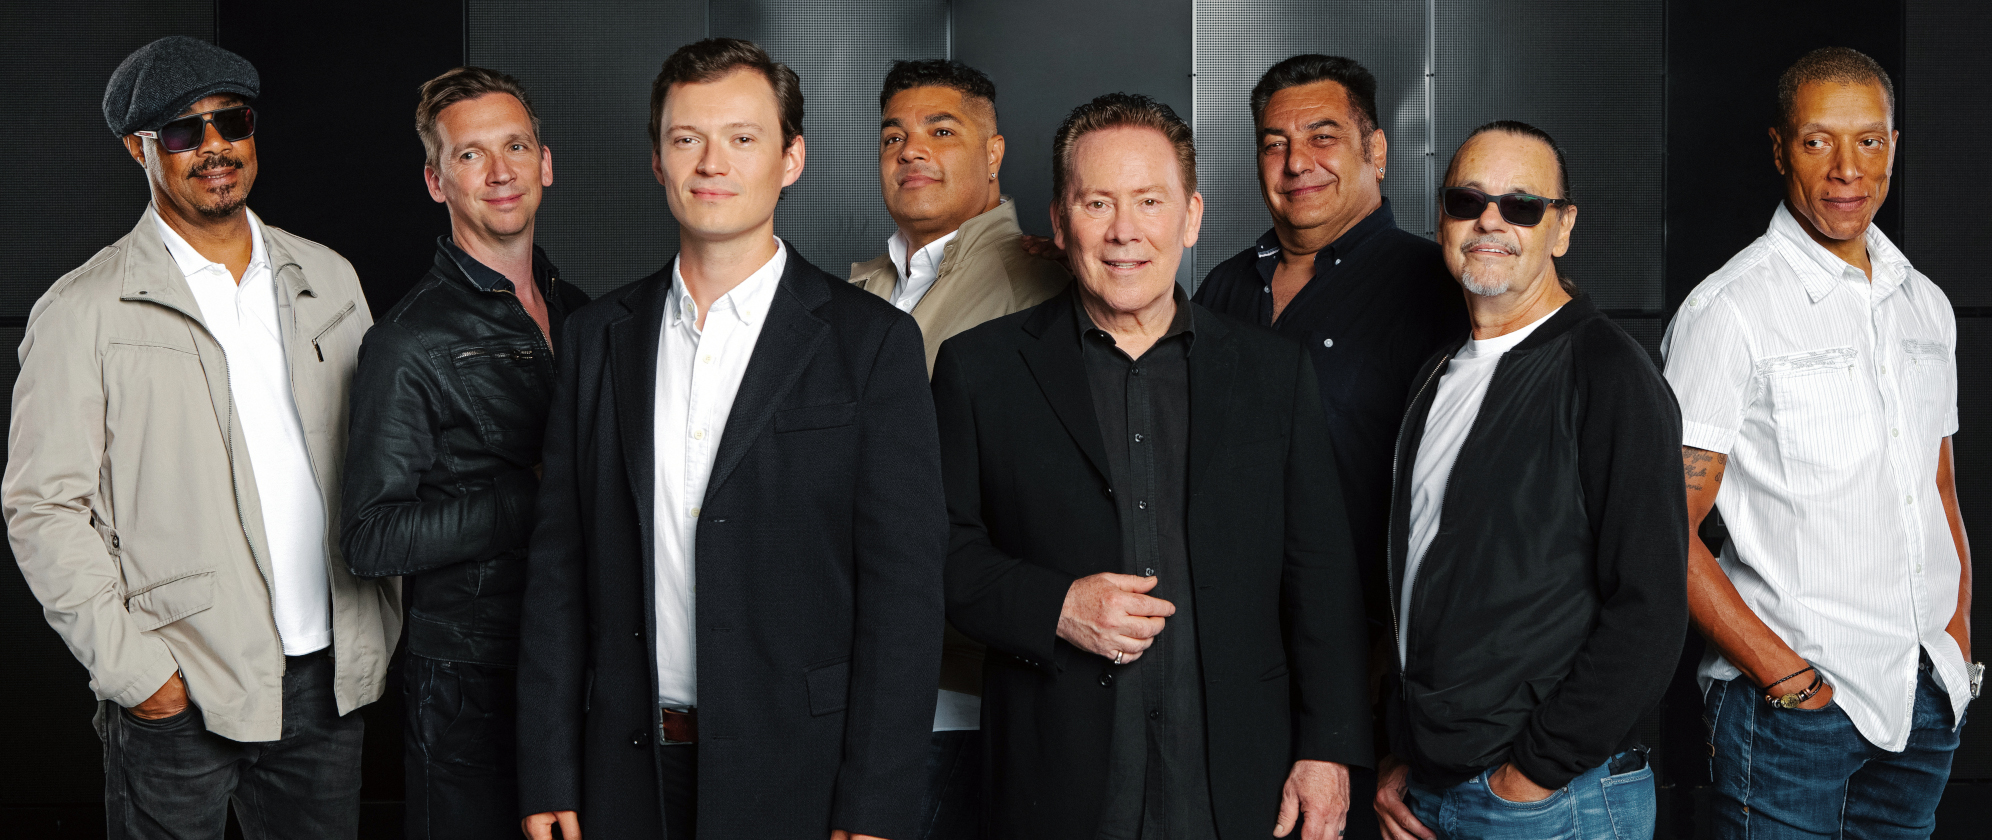 UB40 is Back with a New Single and U.S. Tour, Guitarist Robin Campbell Talks the Band’s Illustrious History